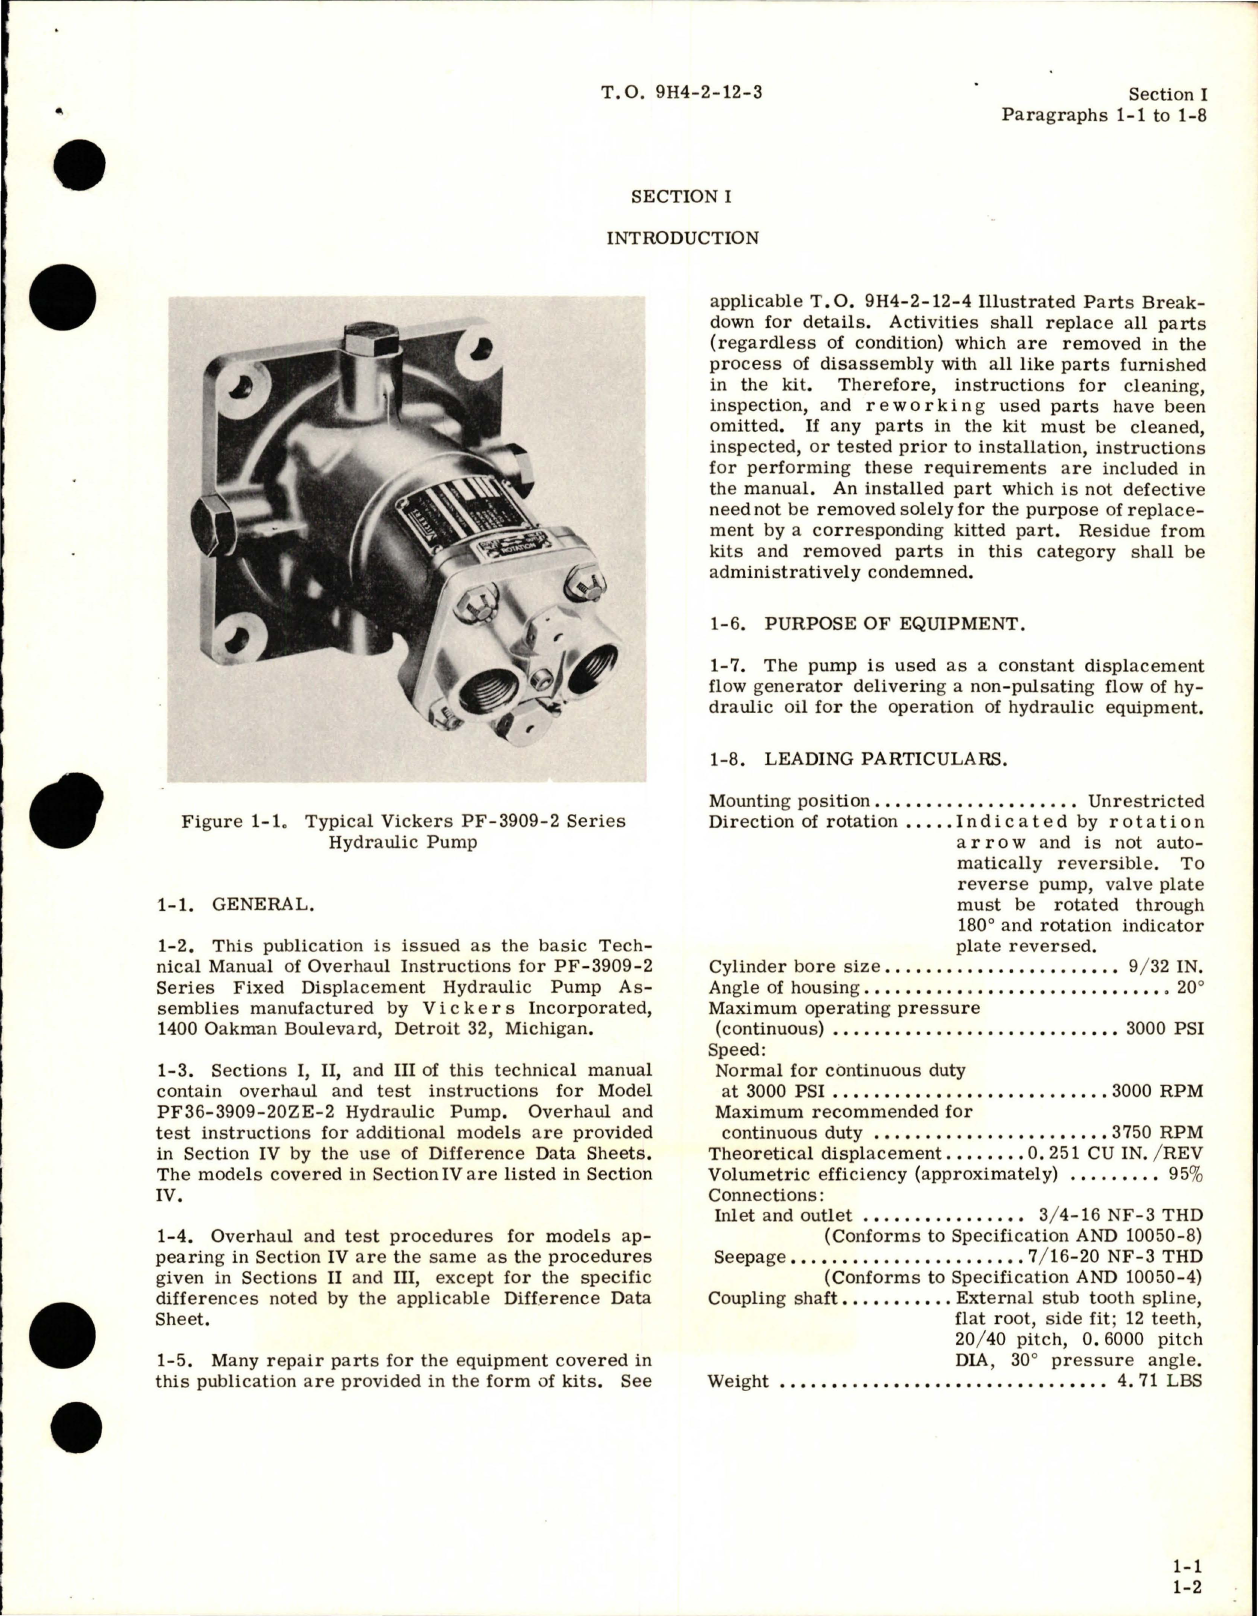 Sample page 5 from AirCorps Library document: Overhaul Manual for Fixed Displacement Hydraulic Pump Assembly - PF-3909-2 Series